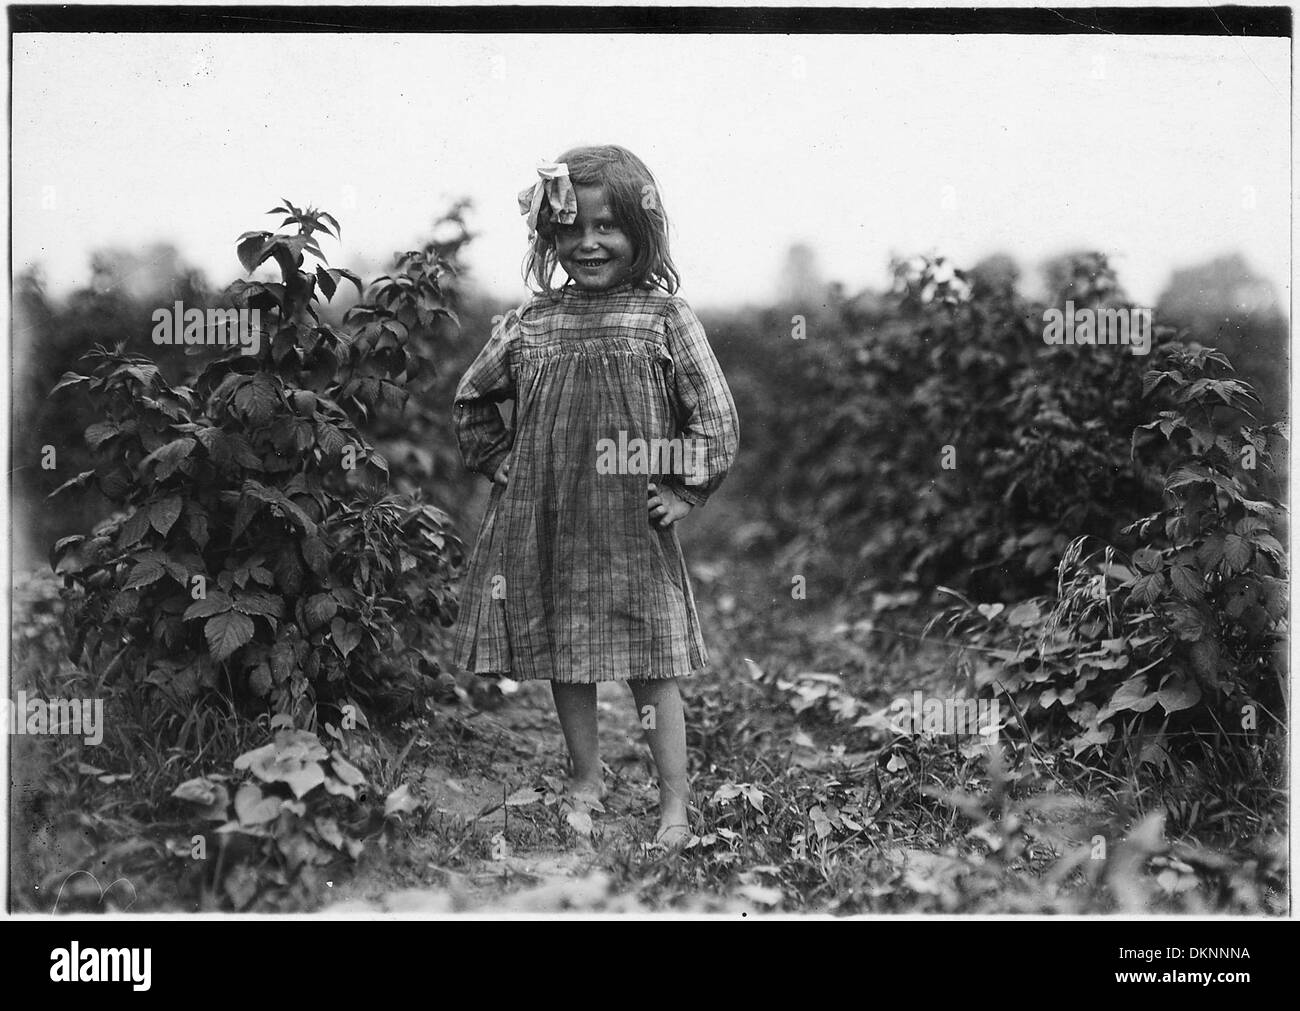 Laura Petty, a 6 year old berry picker on Jenkins Farm. 'I'm just beginnin'. Licked two boxes yesterday.' Gets 2... 523206 Stock Photo